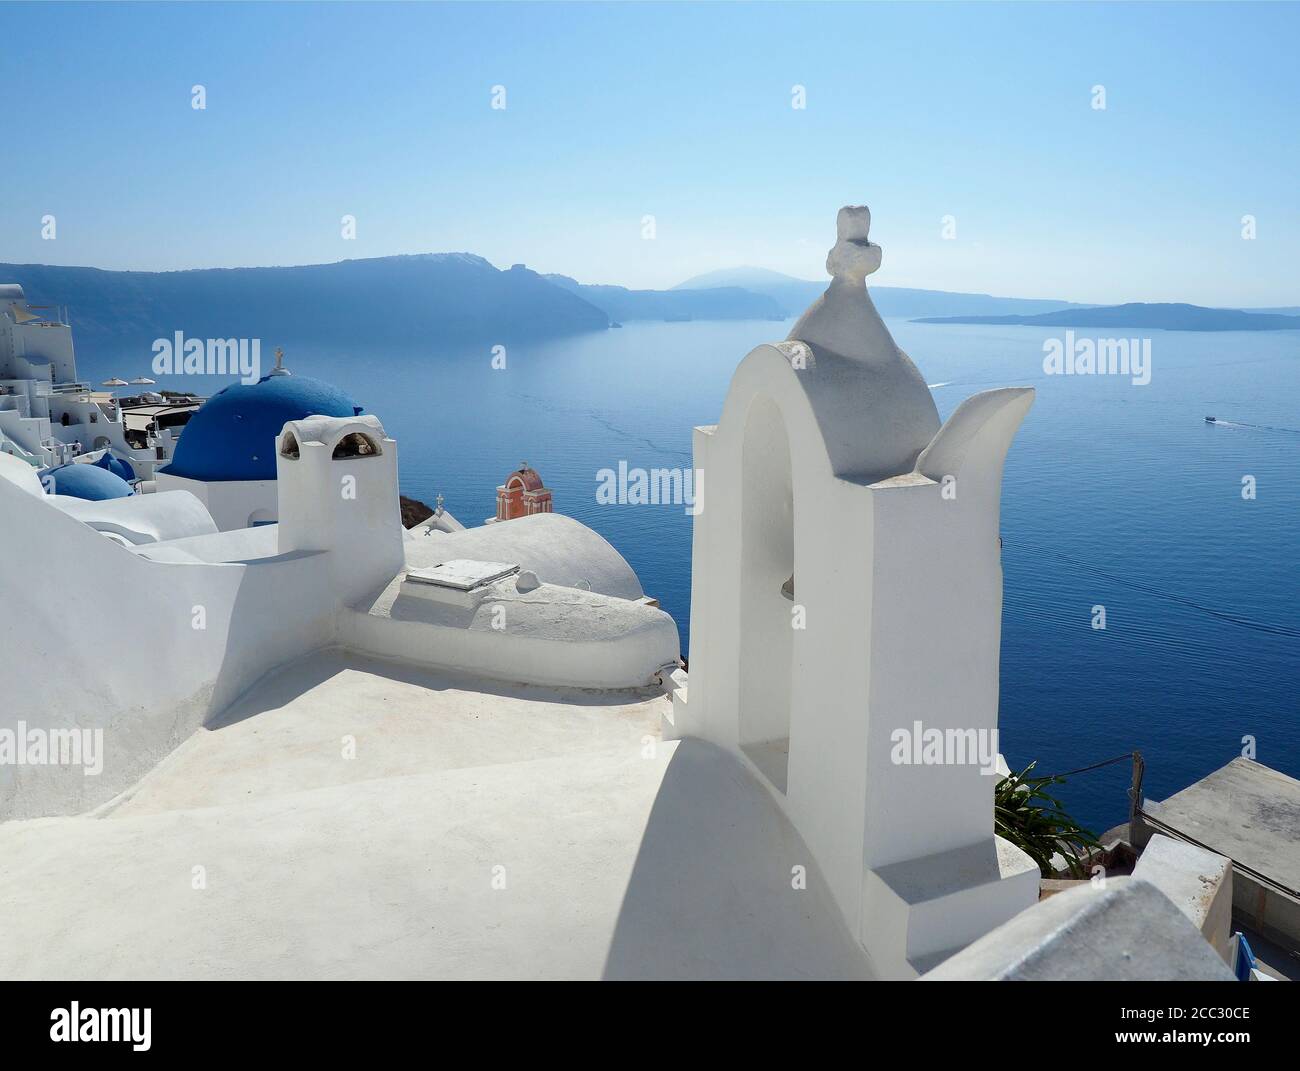 A Unique View of the Whitewashed Buildings and Harbor of Santorini, Greece Stock Photo